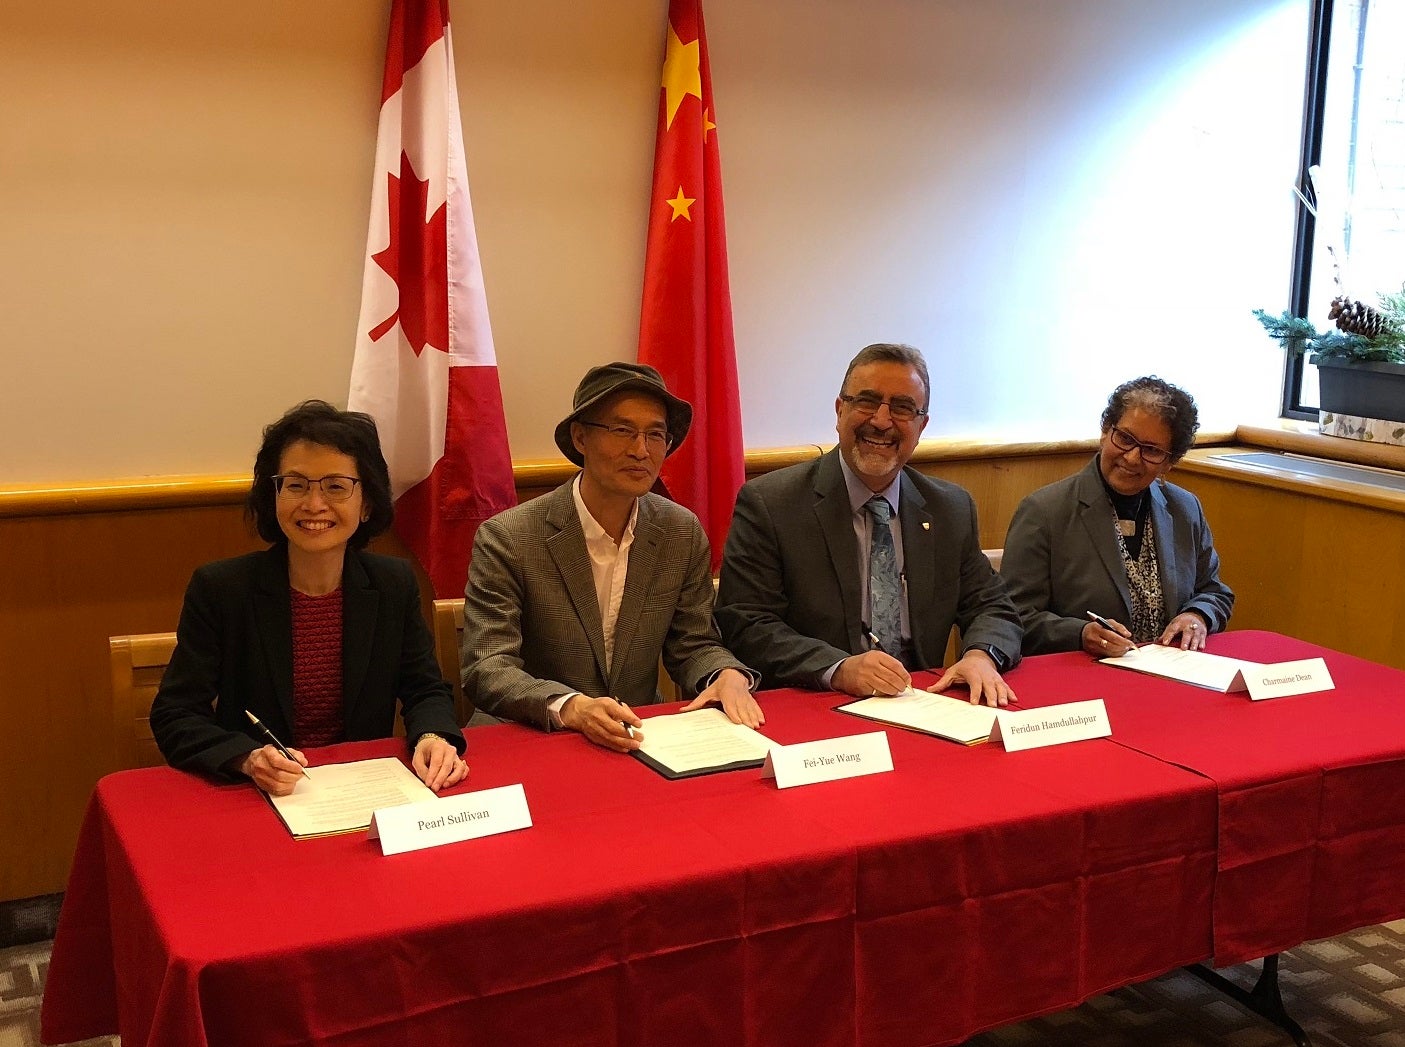 University of Waterloo officials Pearl Sullivan, Feridun Hamdullahpur and Charmaine Dean sign a research agreement with Fei-Yue Wang of the Qingdao Academy of Intelligent Industries (QAII) in China.